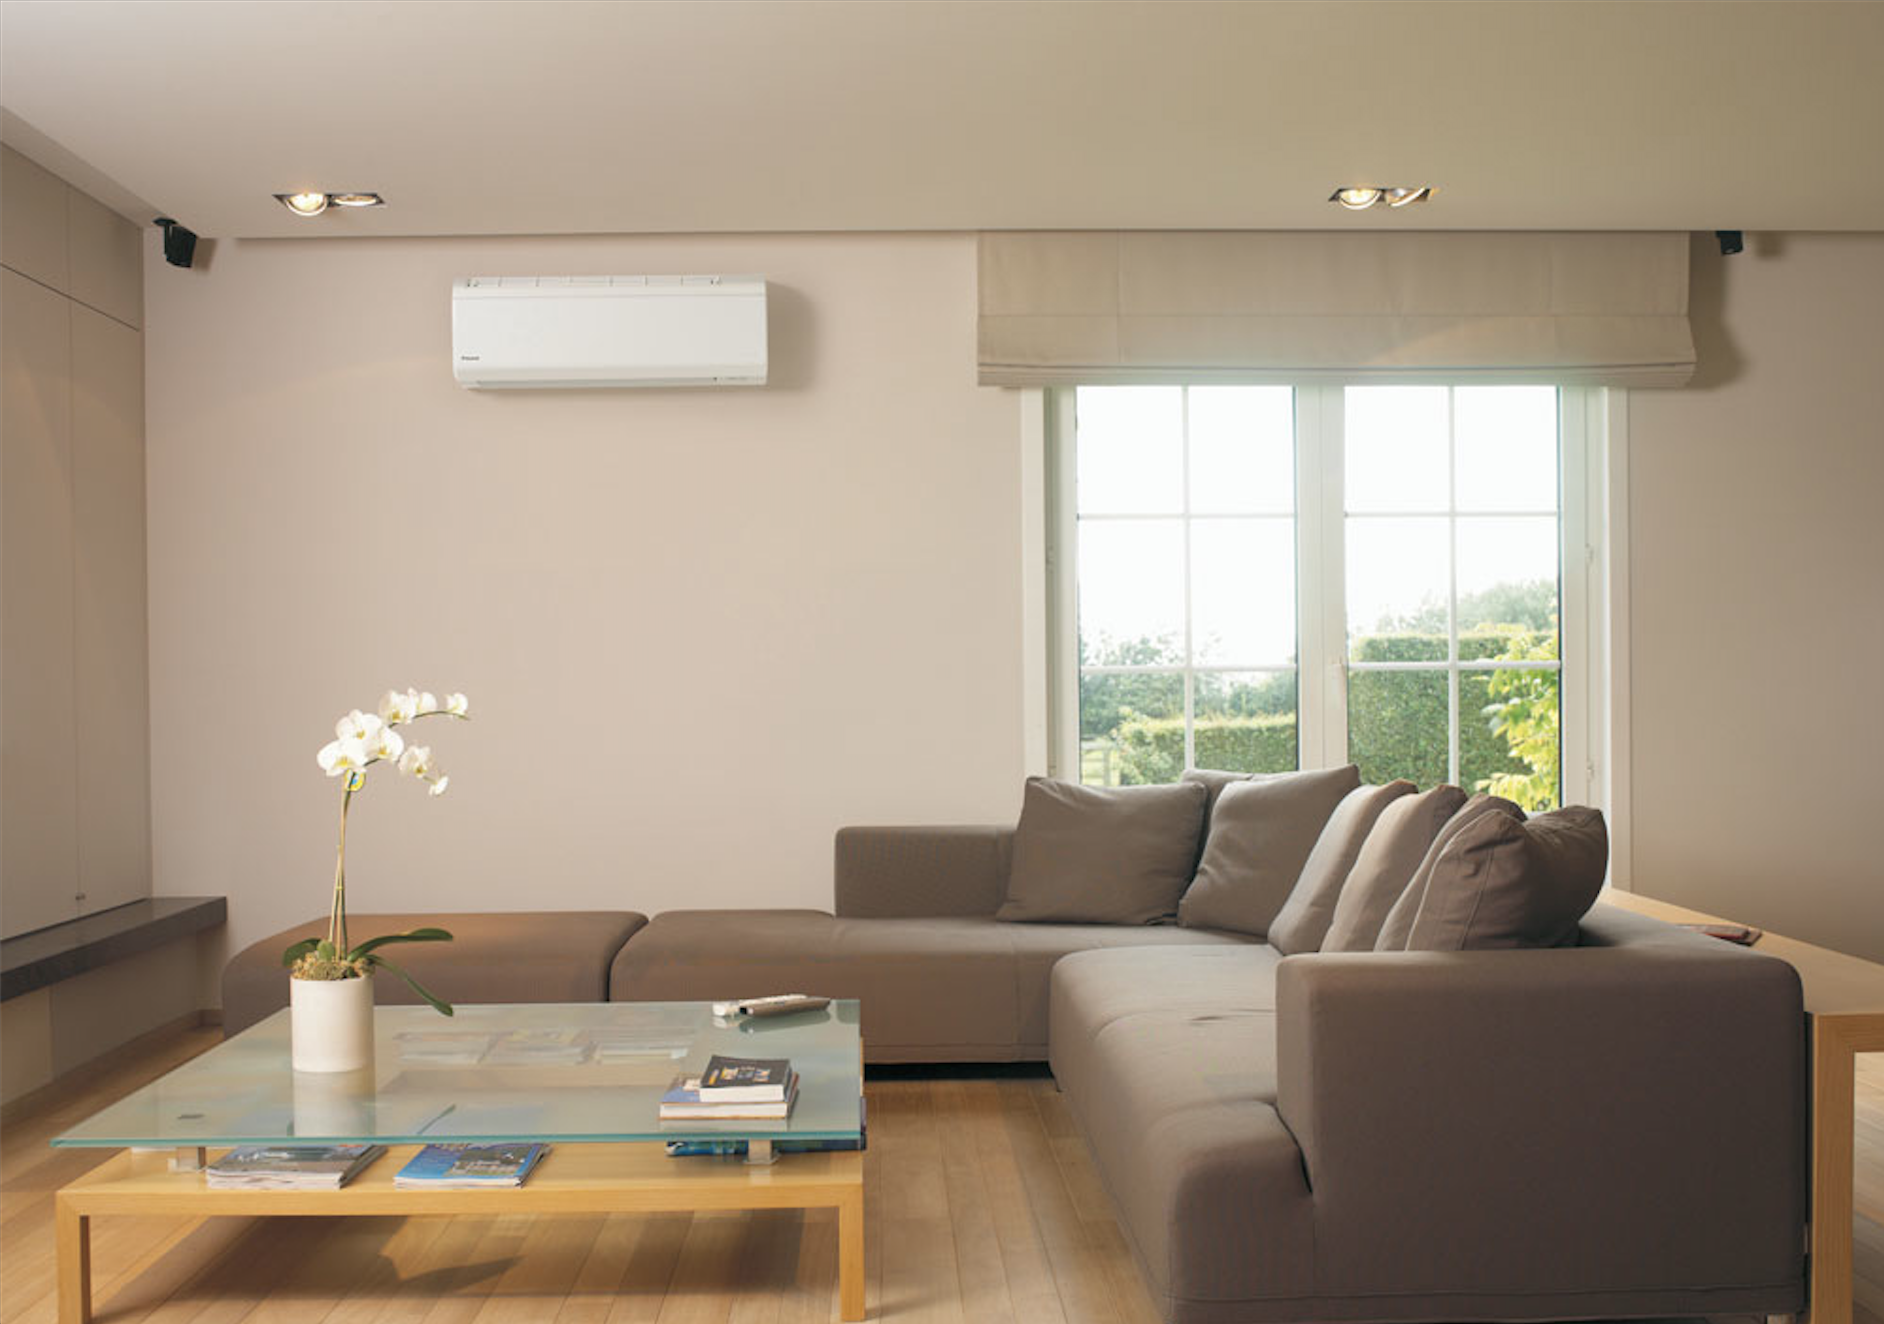 Mitsubishi ductless system comfort and efficiency